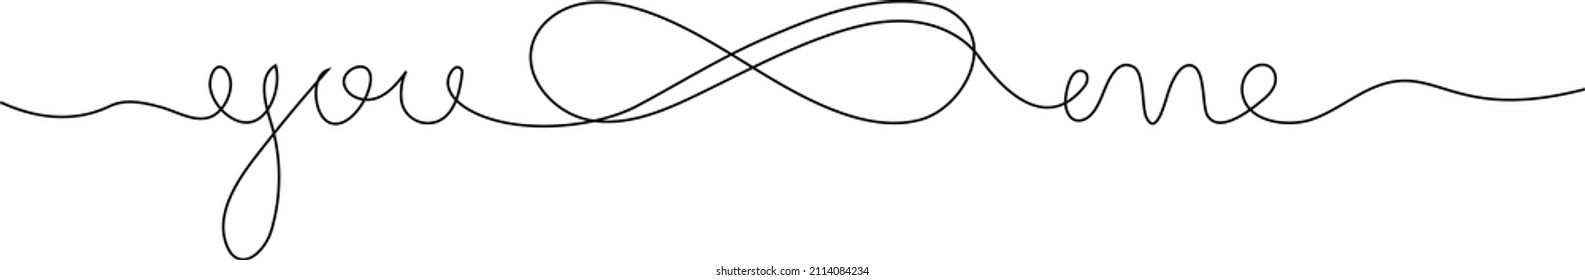 You   me    single line drawing and infinity symbol  Vector illustration 